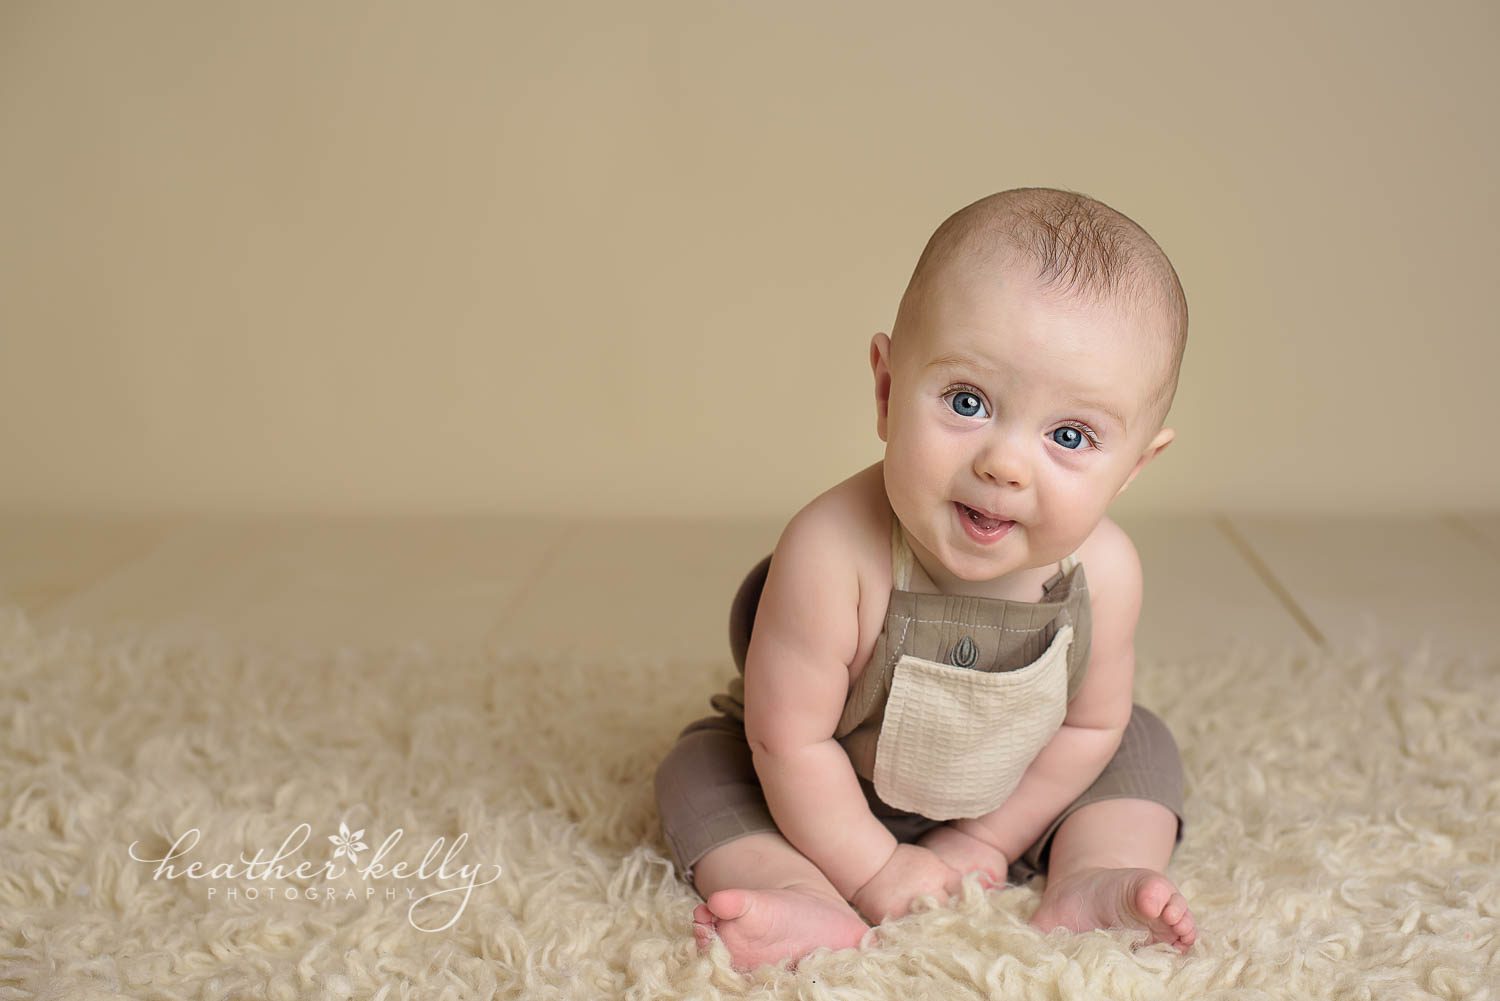 7 month boy sitting during photo session. Cream wood floor and background. Wearing an adorable sitter outfit. newtown baby boy by ct photographer heather kelly photography.